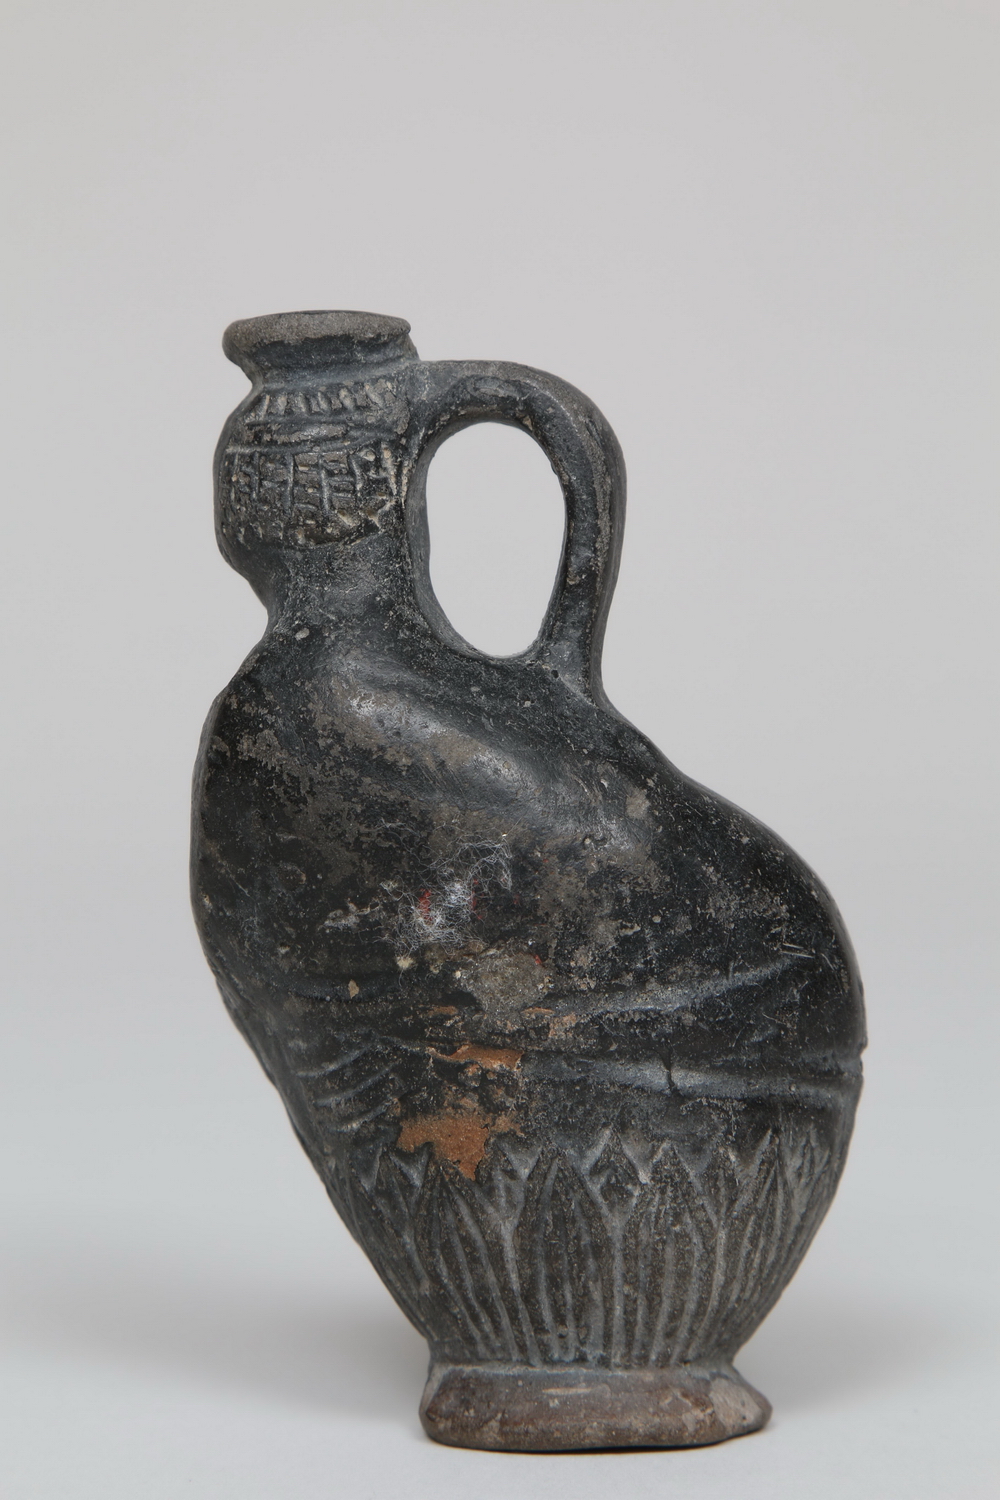 Egypt, black earthenware figure flask, Ptolemaic, 1st century BC - 1st AD., - Image 5 of 9